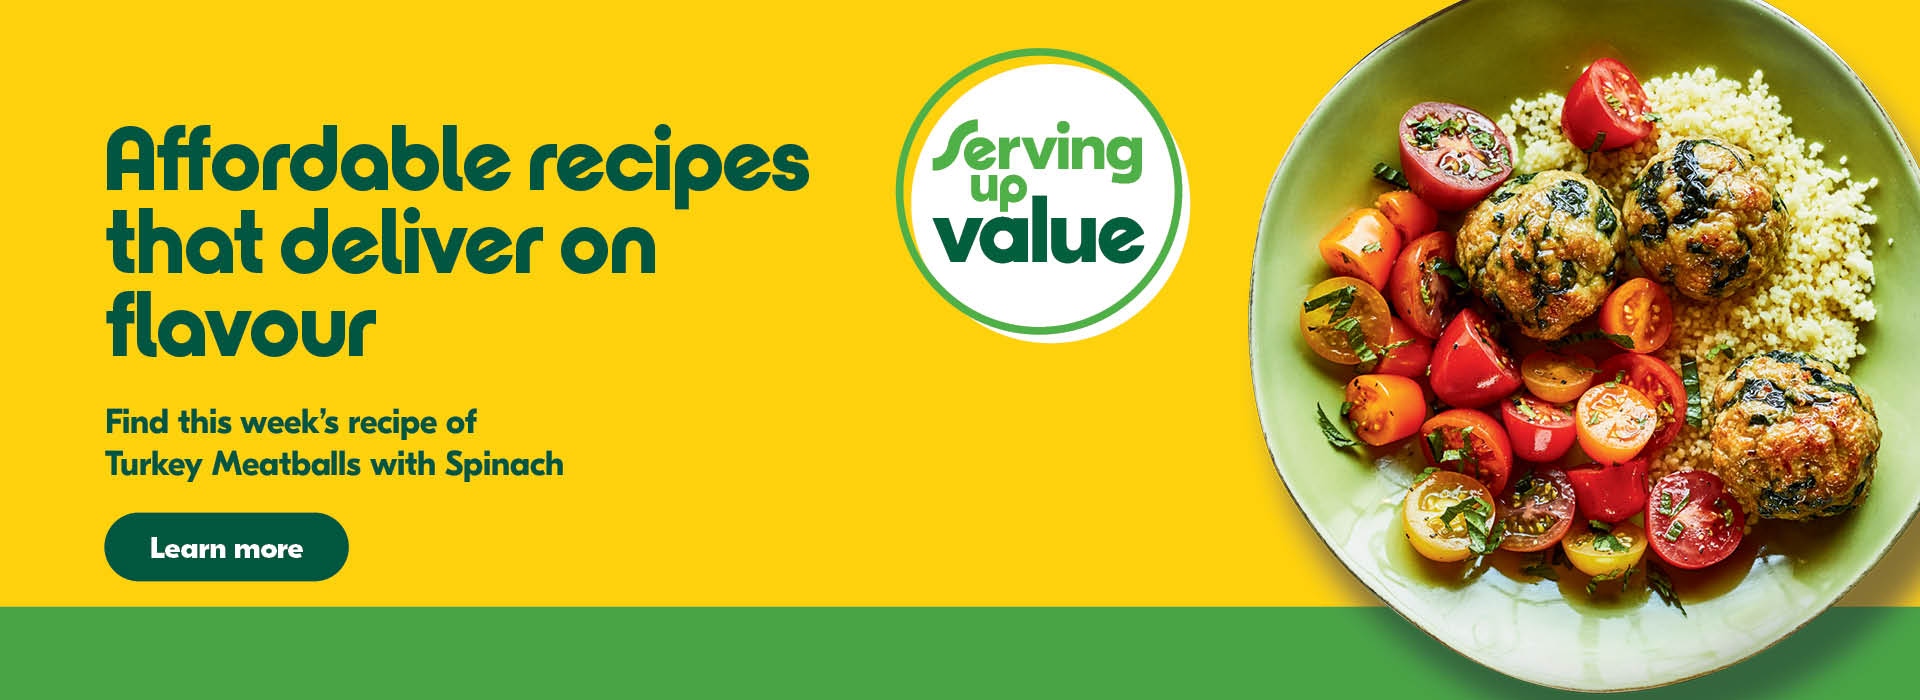 Affordable recipes that deliver on flavour; this weeks recipe is Turkey Meatballs with Spinach